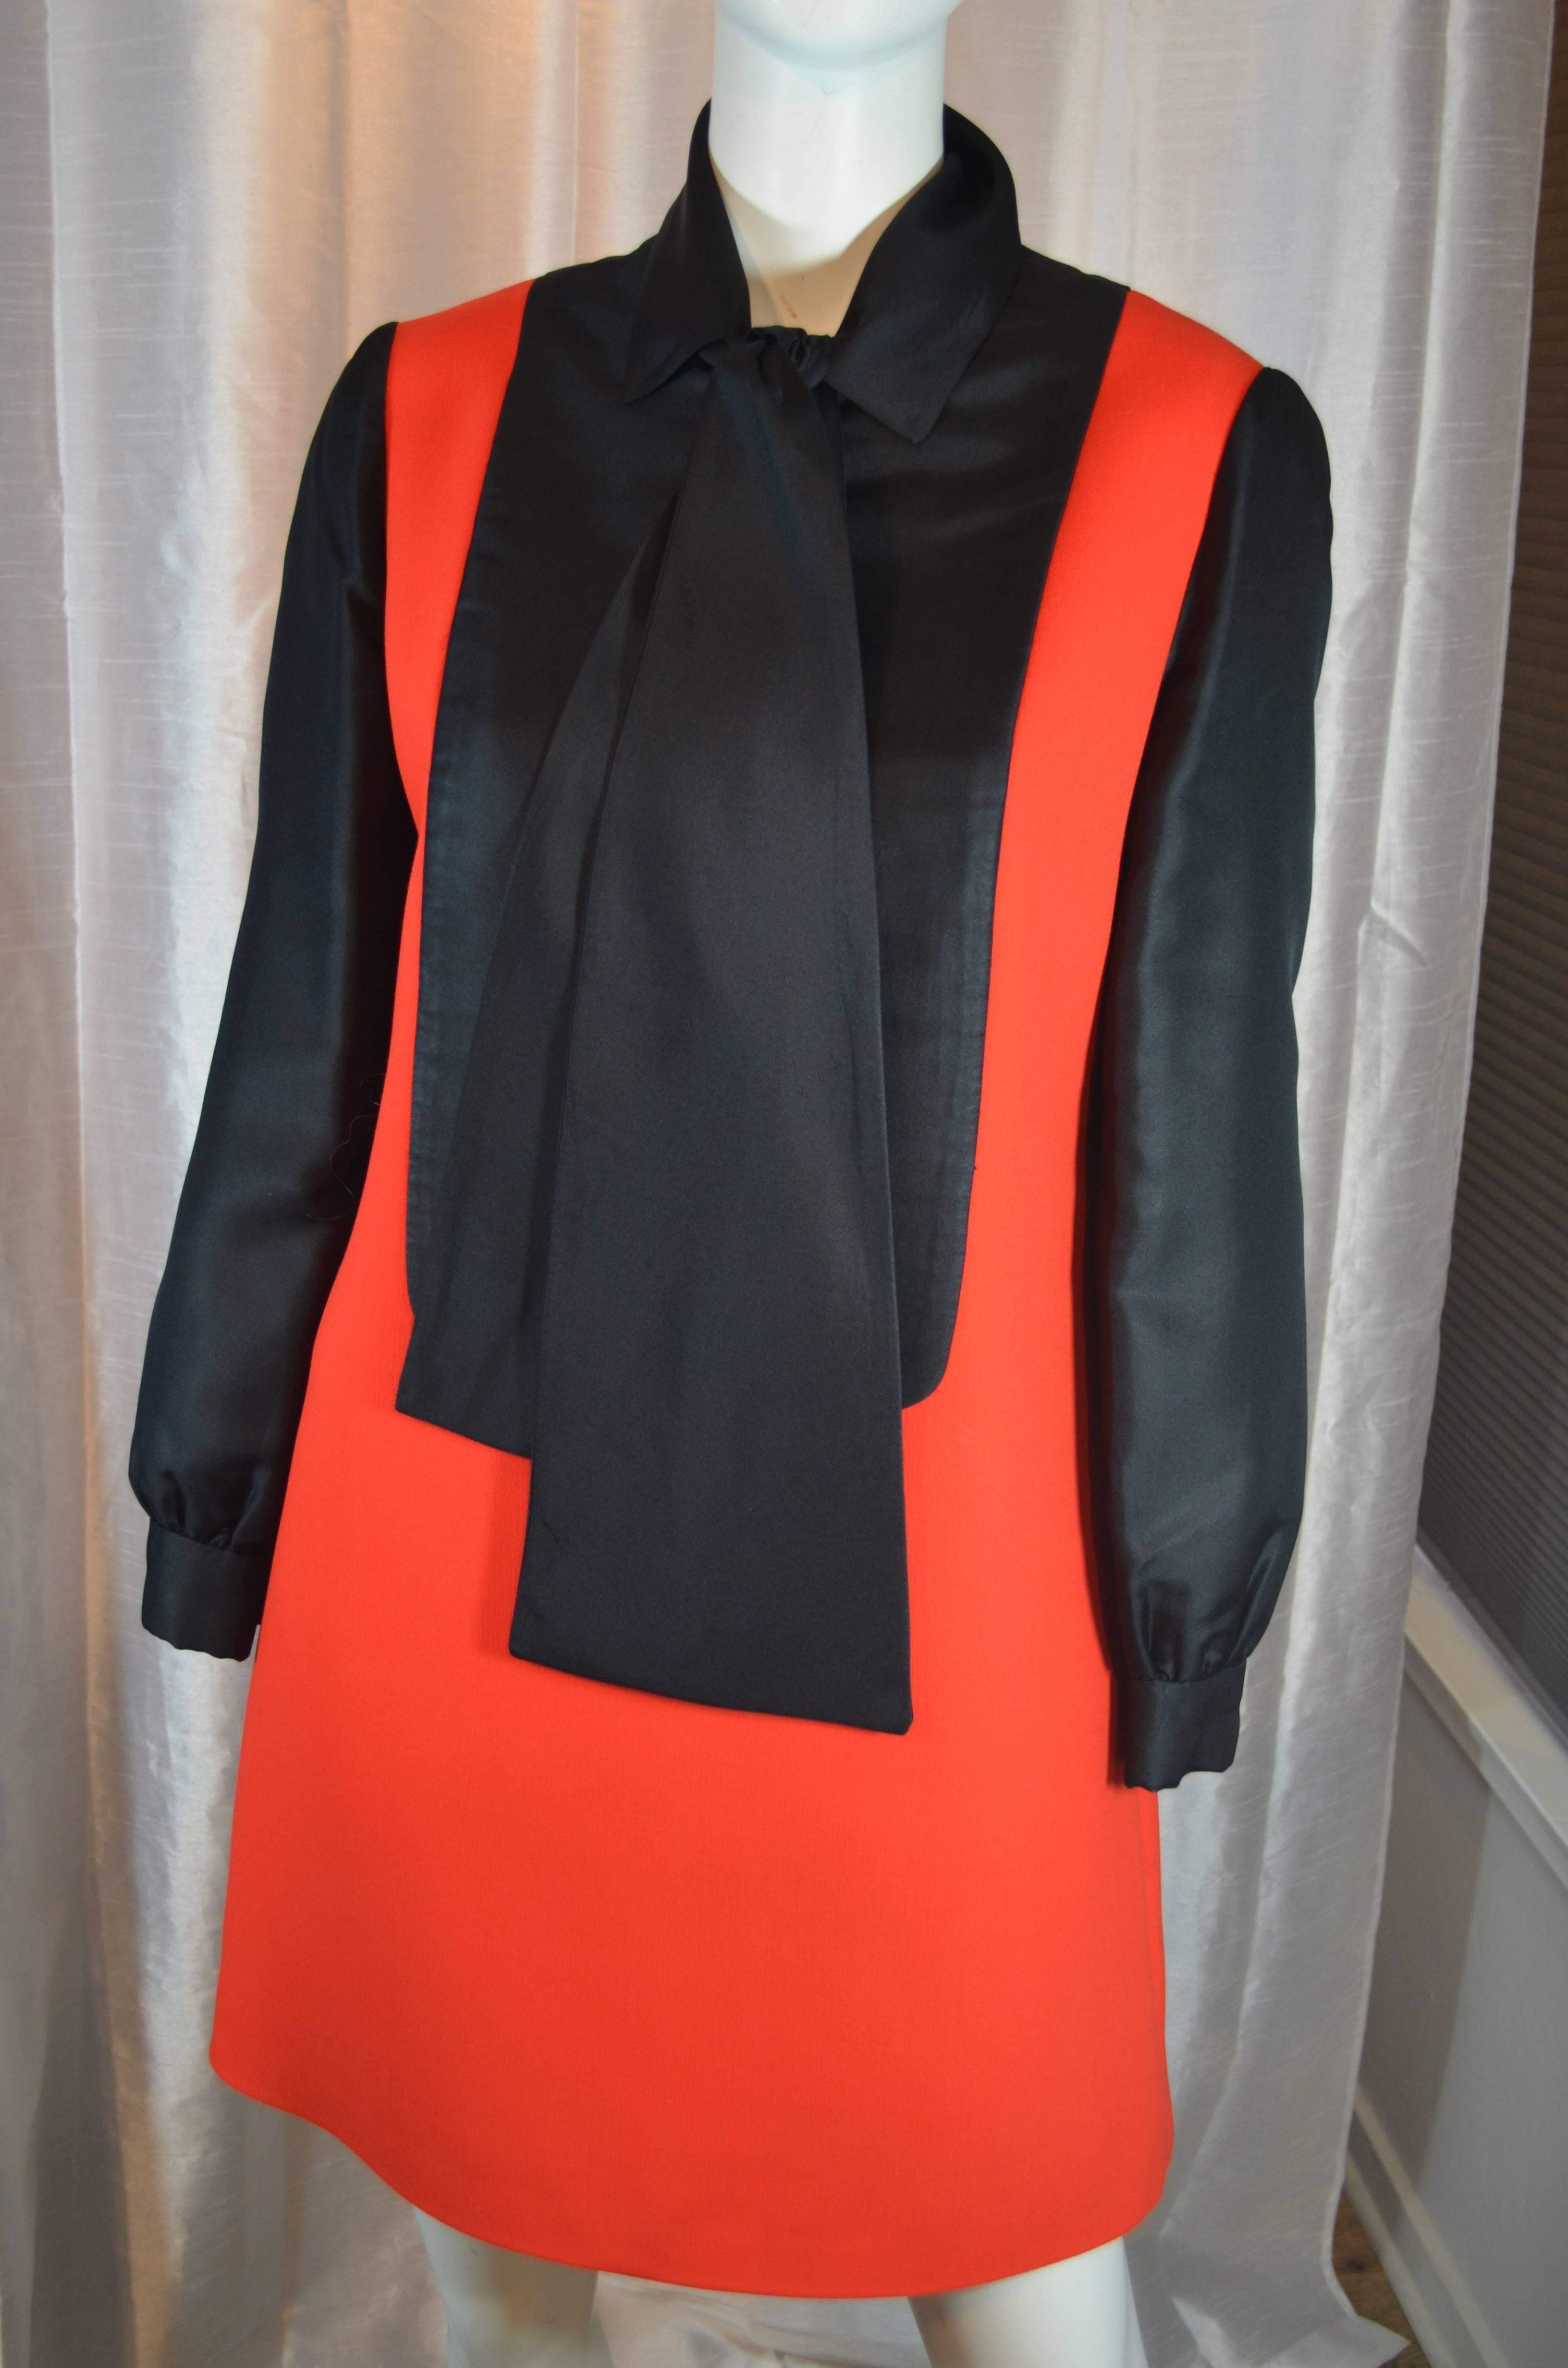 Geoffrey Beene Tuxedo Dress In Excellent Condition For Sale In Carmel, CA